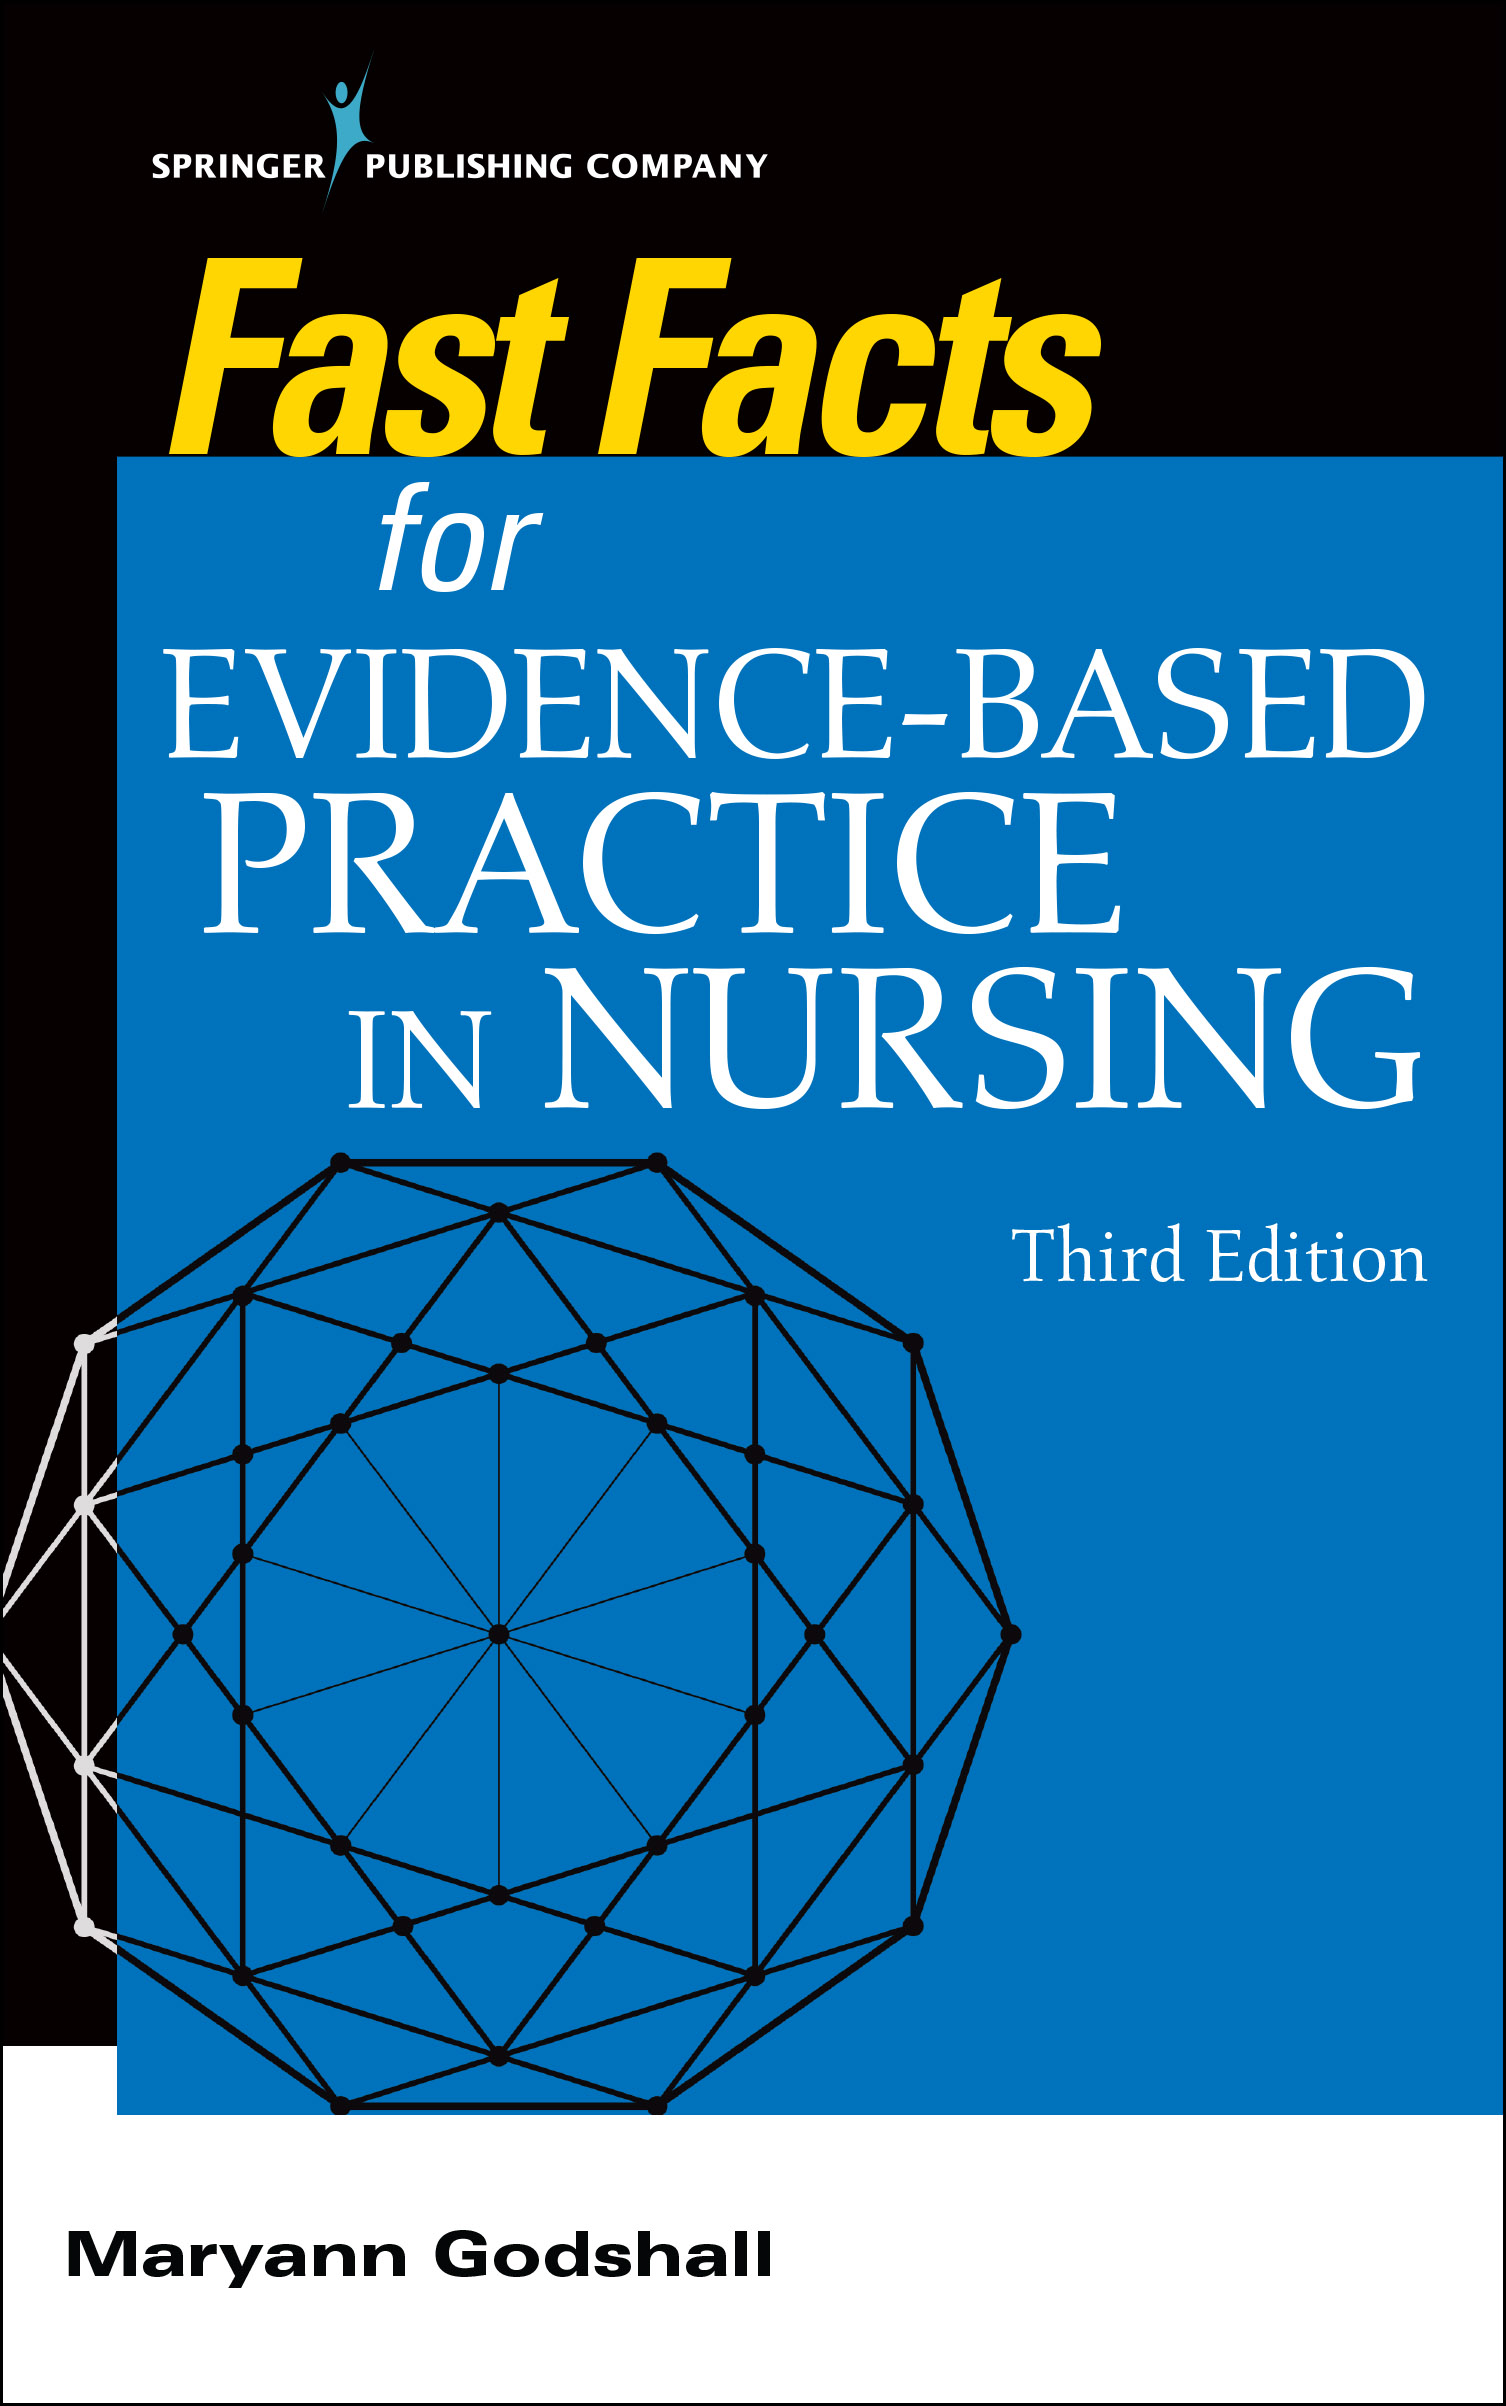 Fast Facts for Evidence-Based Practice in Nursing, 3rd Ed.